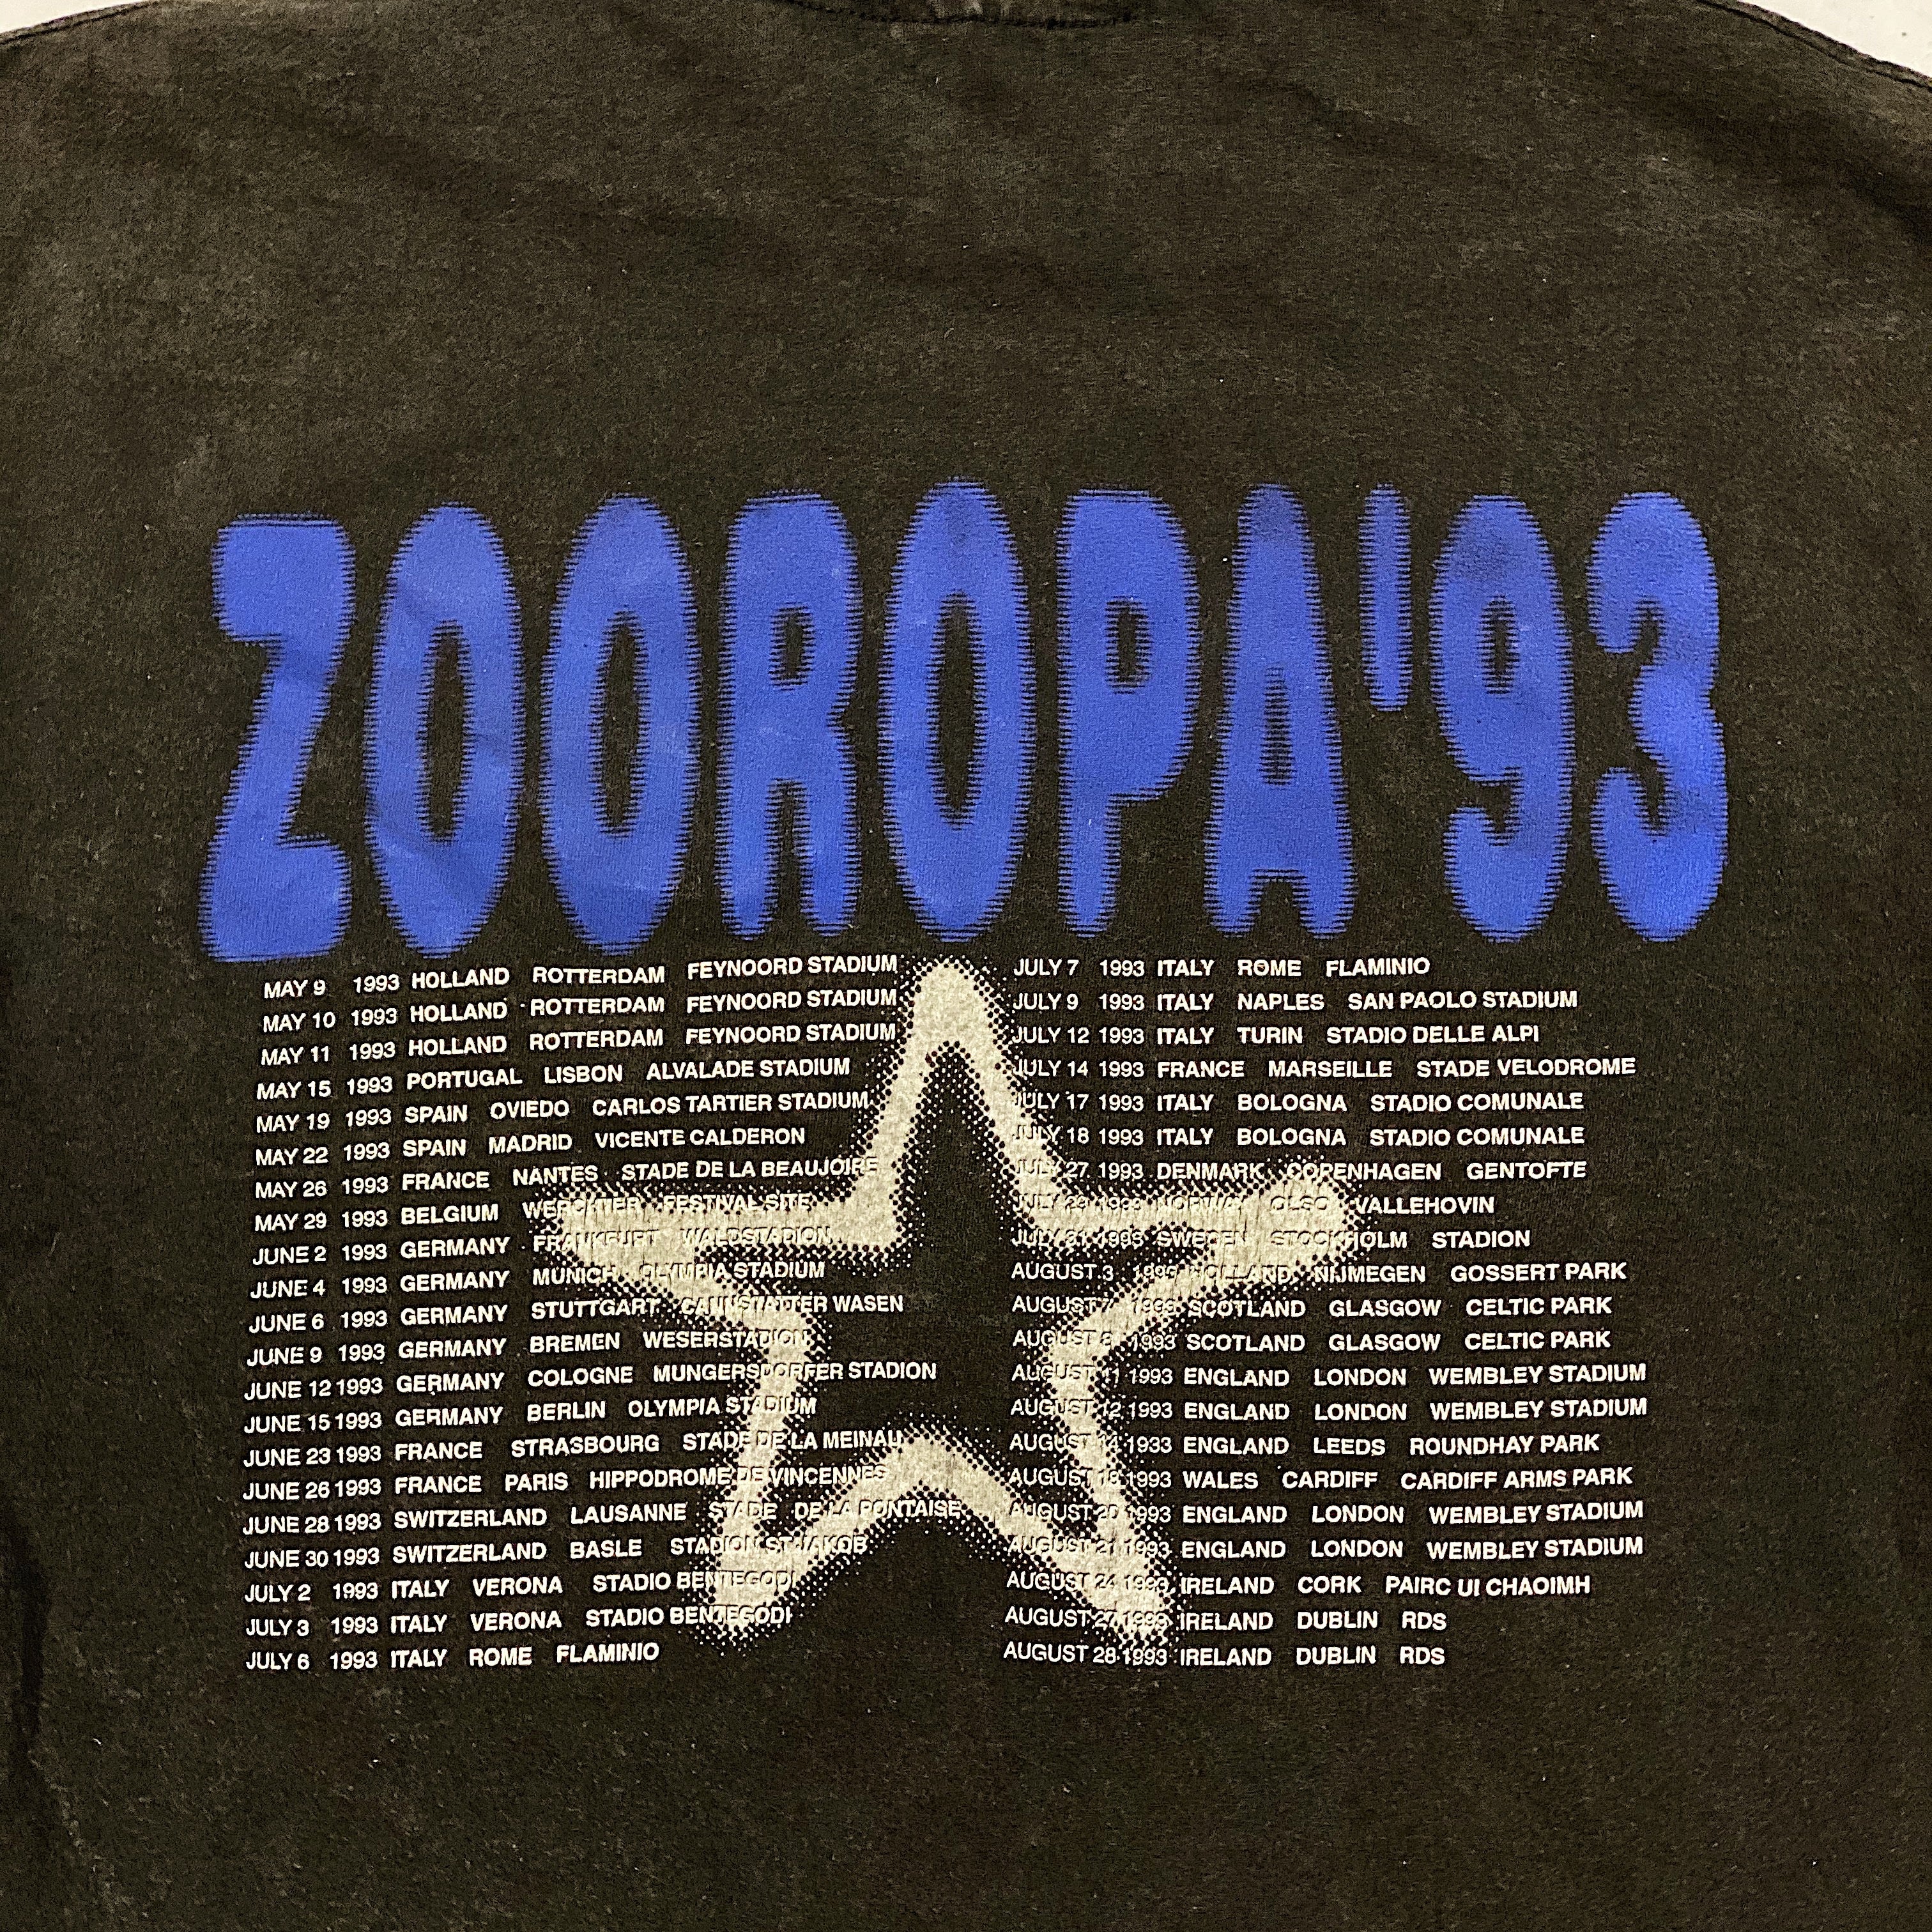 U2 Zooropa Concert T-Shirt from 1993 European Tour | Large Size